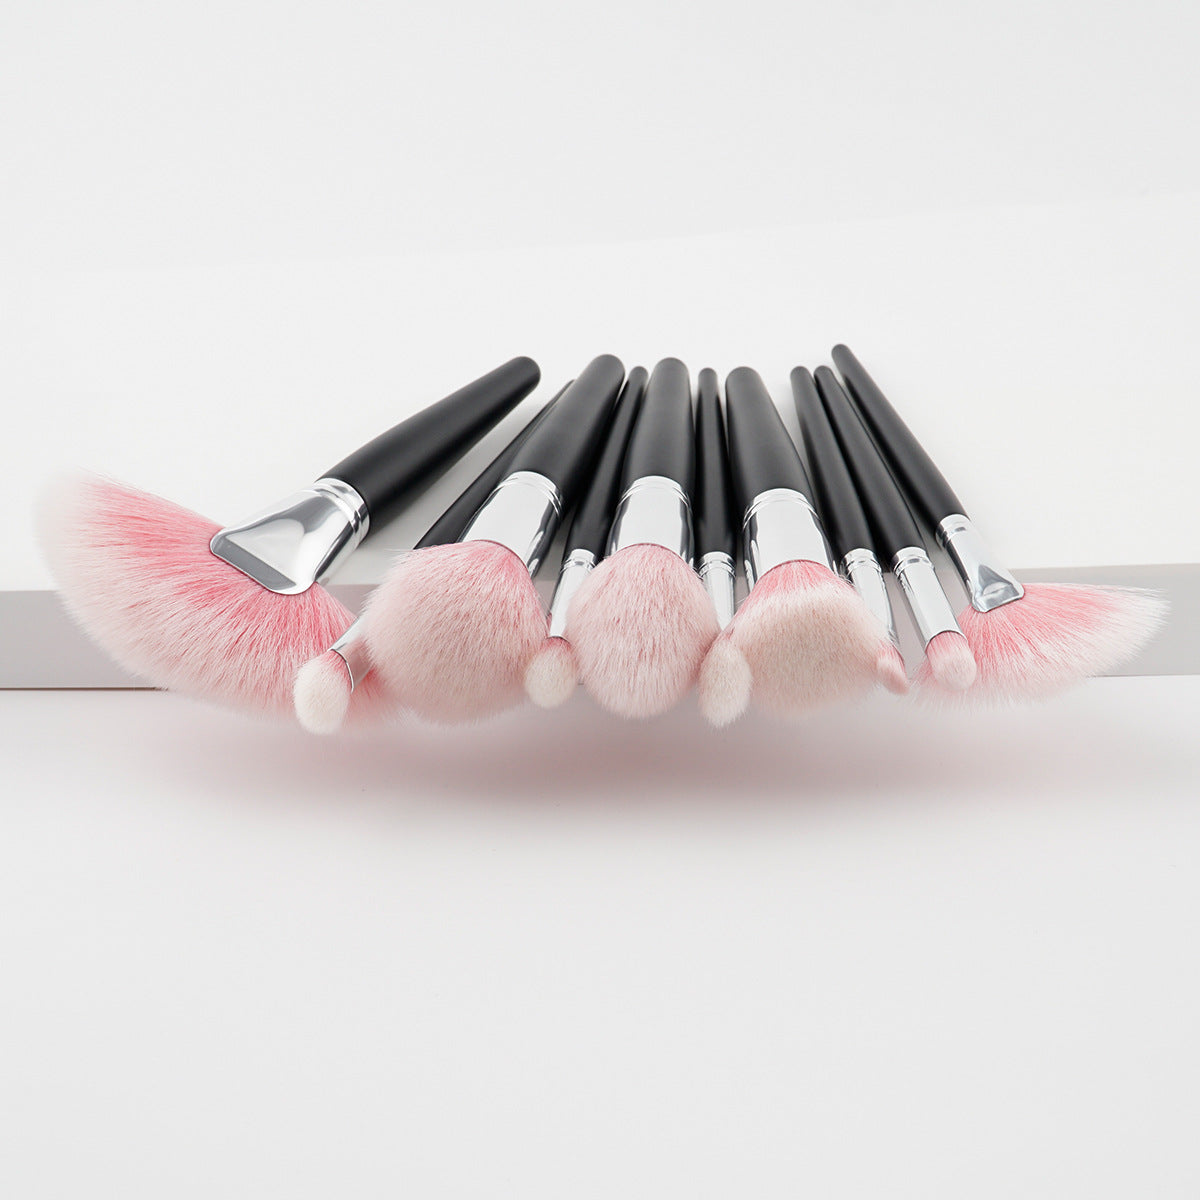 10 beauty makeup brushes